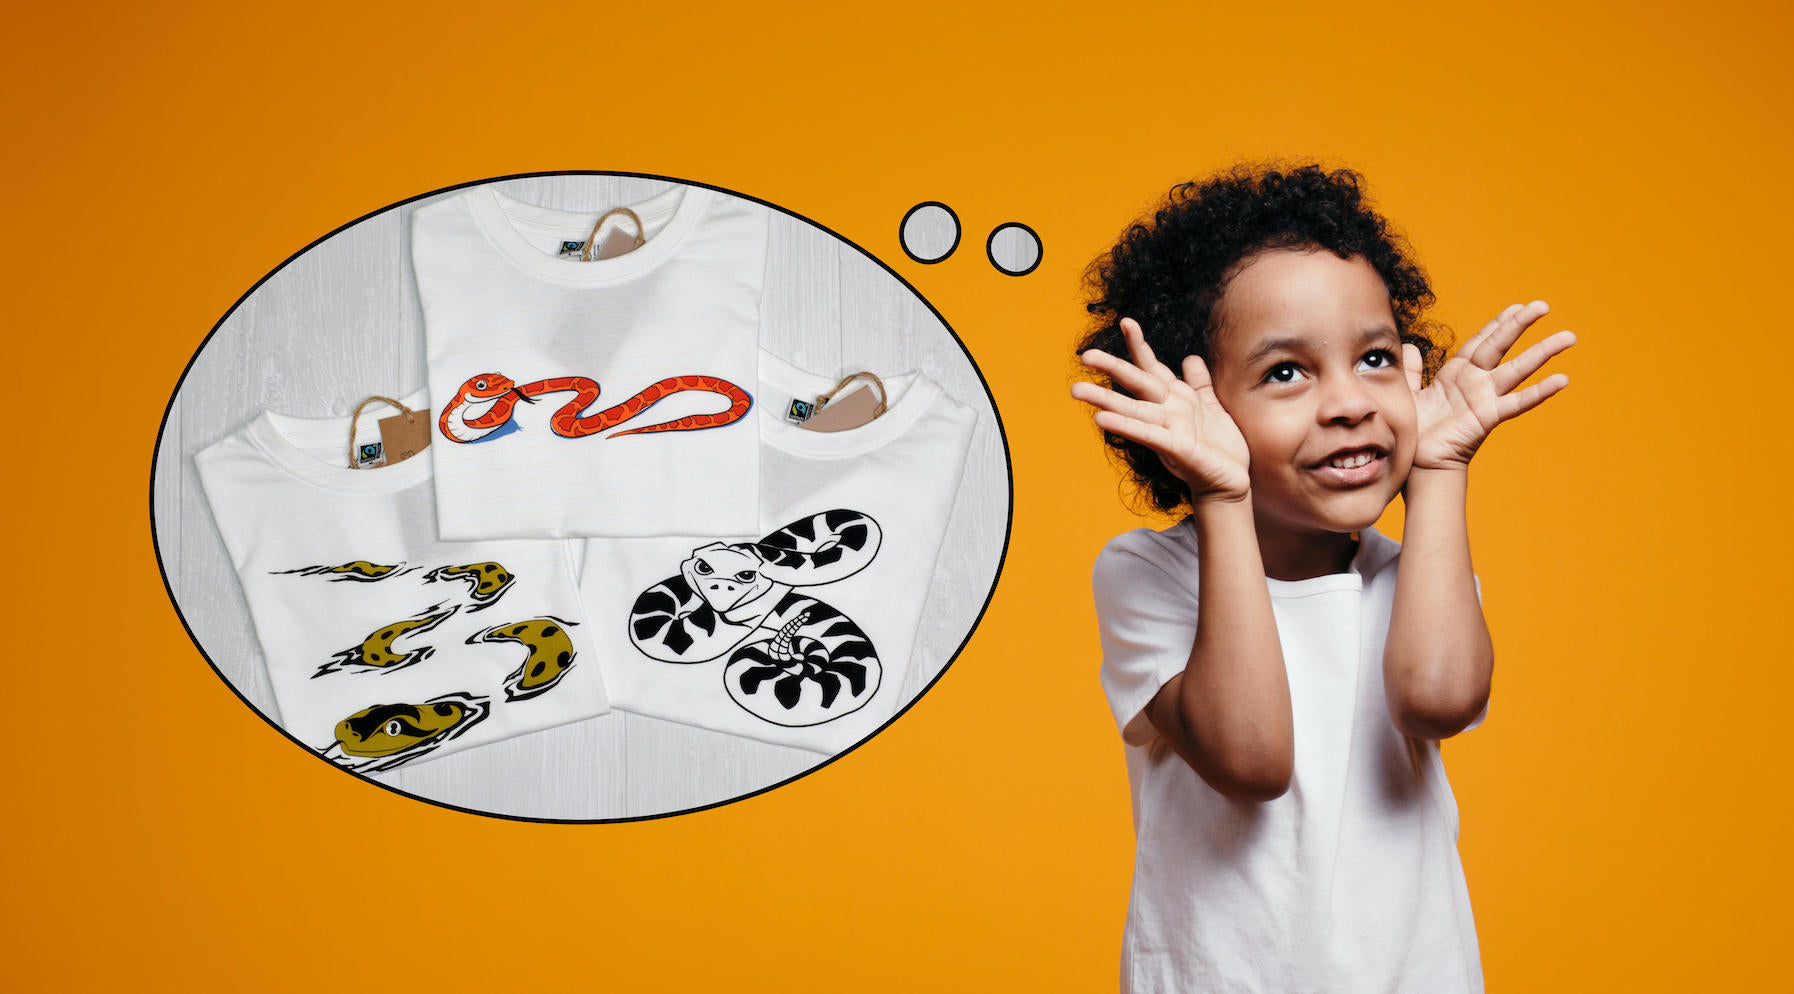 A young boy in a plain white t-shirt dreams of three shirts with snake prints on them. One shirt has a corn snake print, another has a swimming anaconda, and the third has a rattlesnake printed on it.